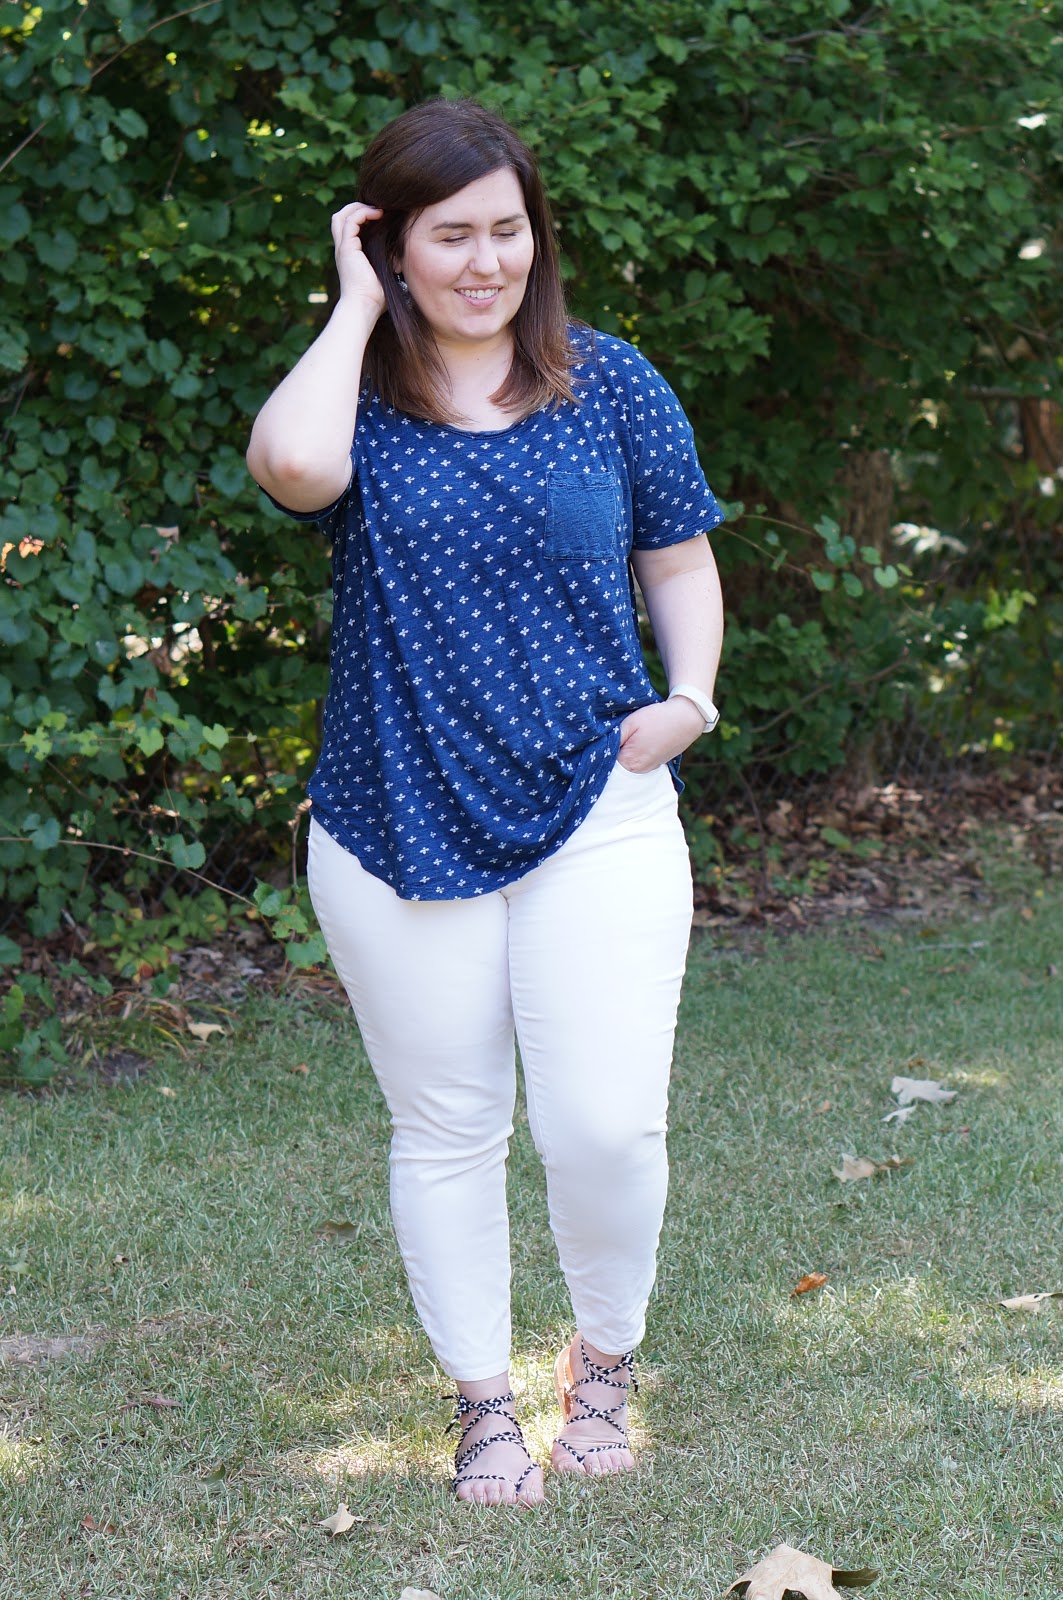 Rebecca Lately Sseko Ribbon Sandals Woven Arrow Ribbons in Navy Old Navy Linen Tee Ann Taylor Curvy Petite Skinny Jeans